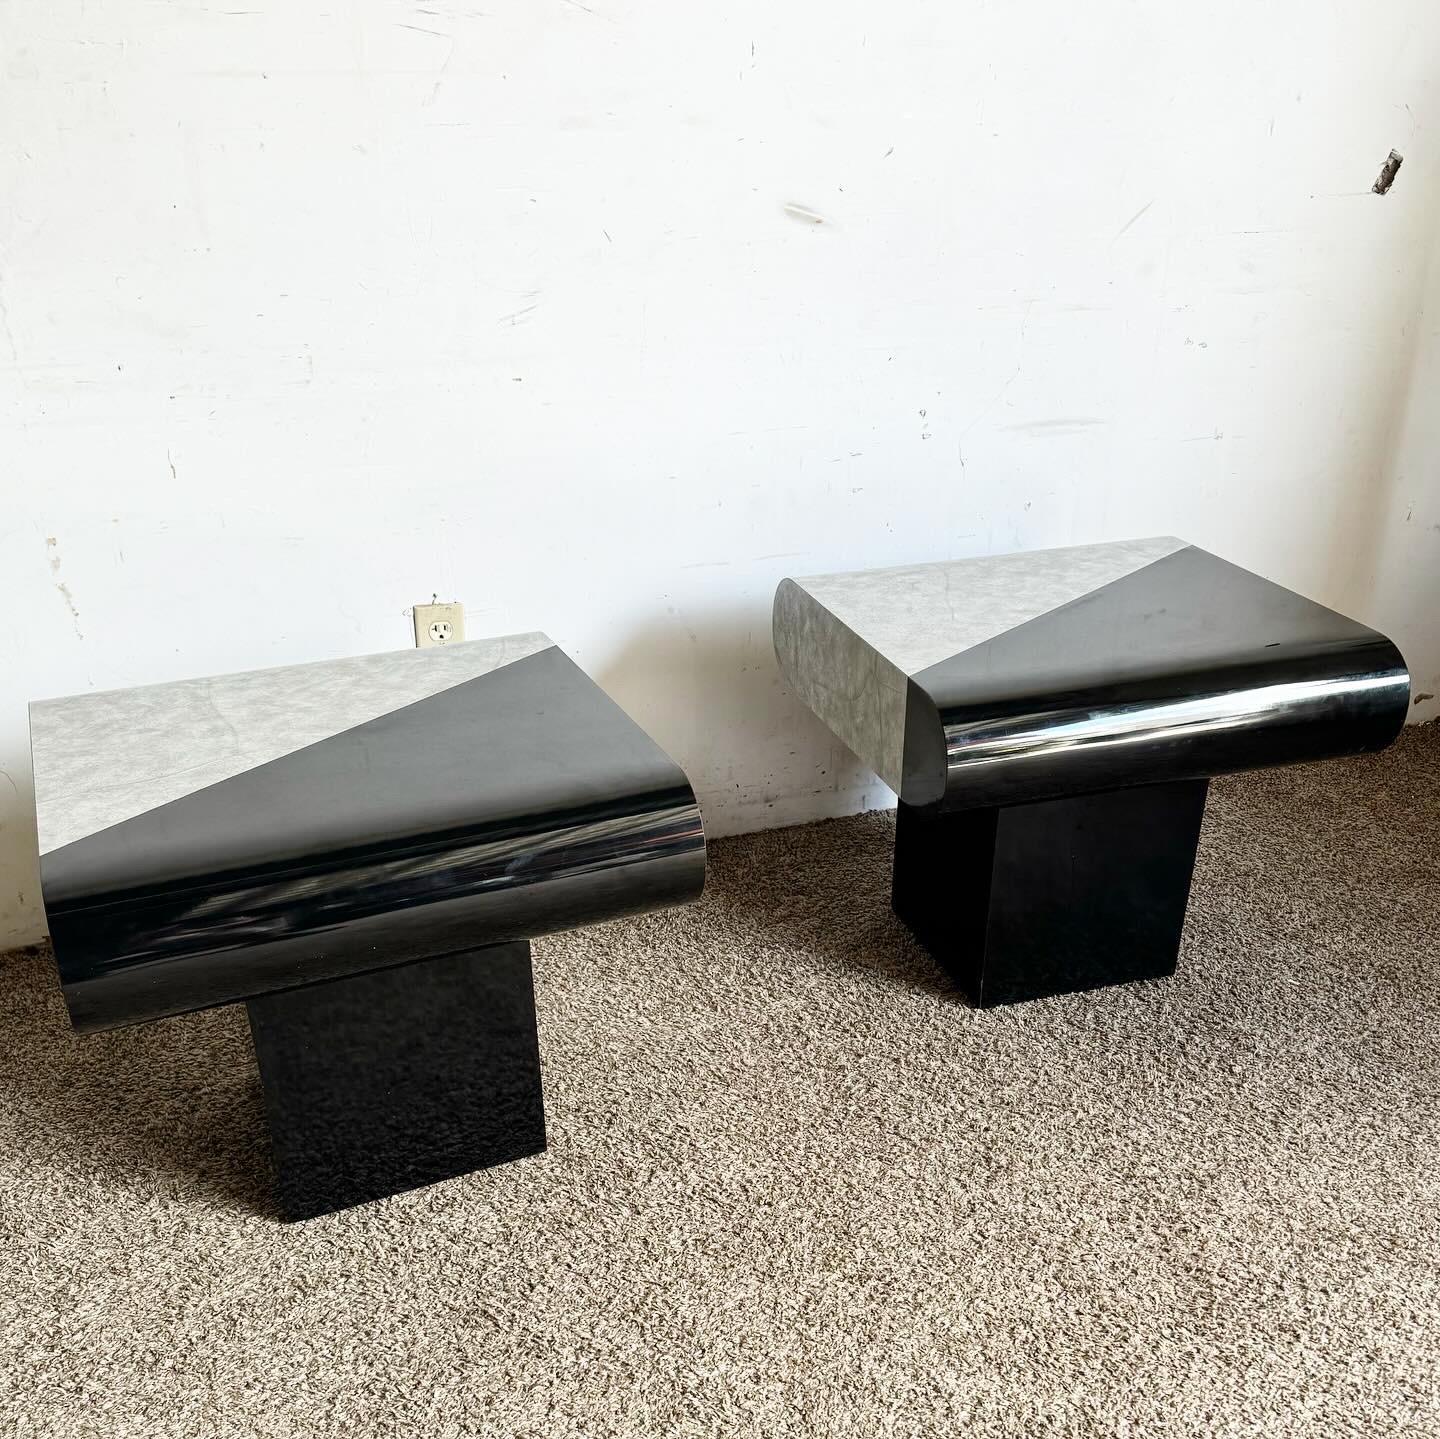 Discover the bold and innovative design of the Postmodern Black Gloss and Faux Stone Laminate Bullnose Side Tables. Featuring a striking contrast between sleek black gloss and textured faux stone, these tables exemplify postmodern aesthetics. With